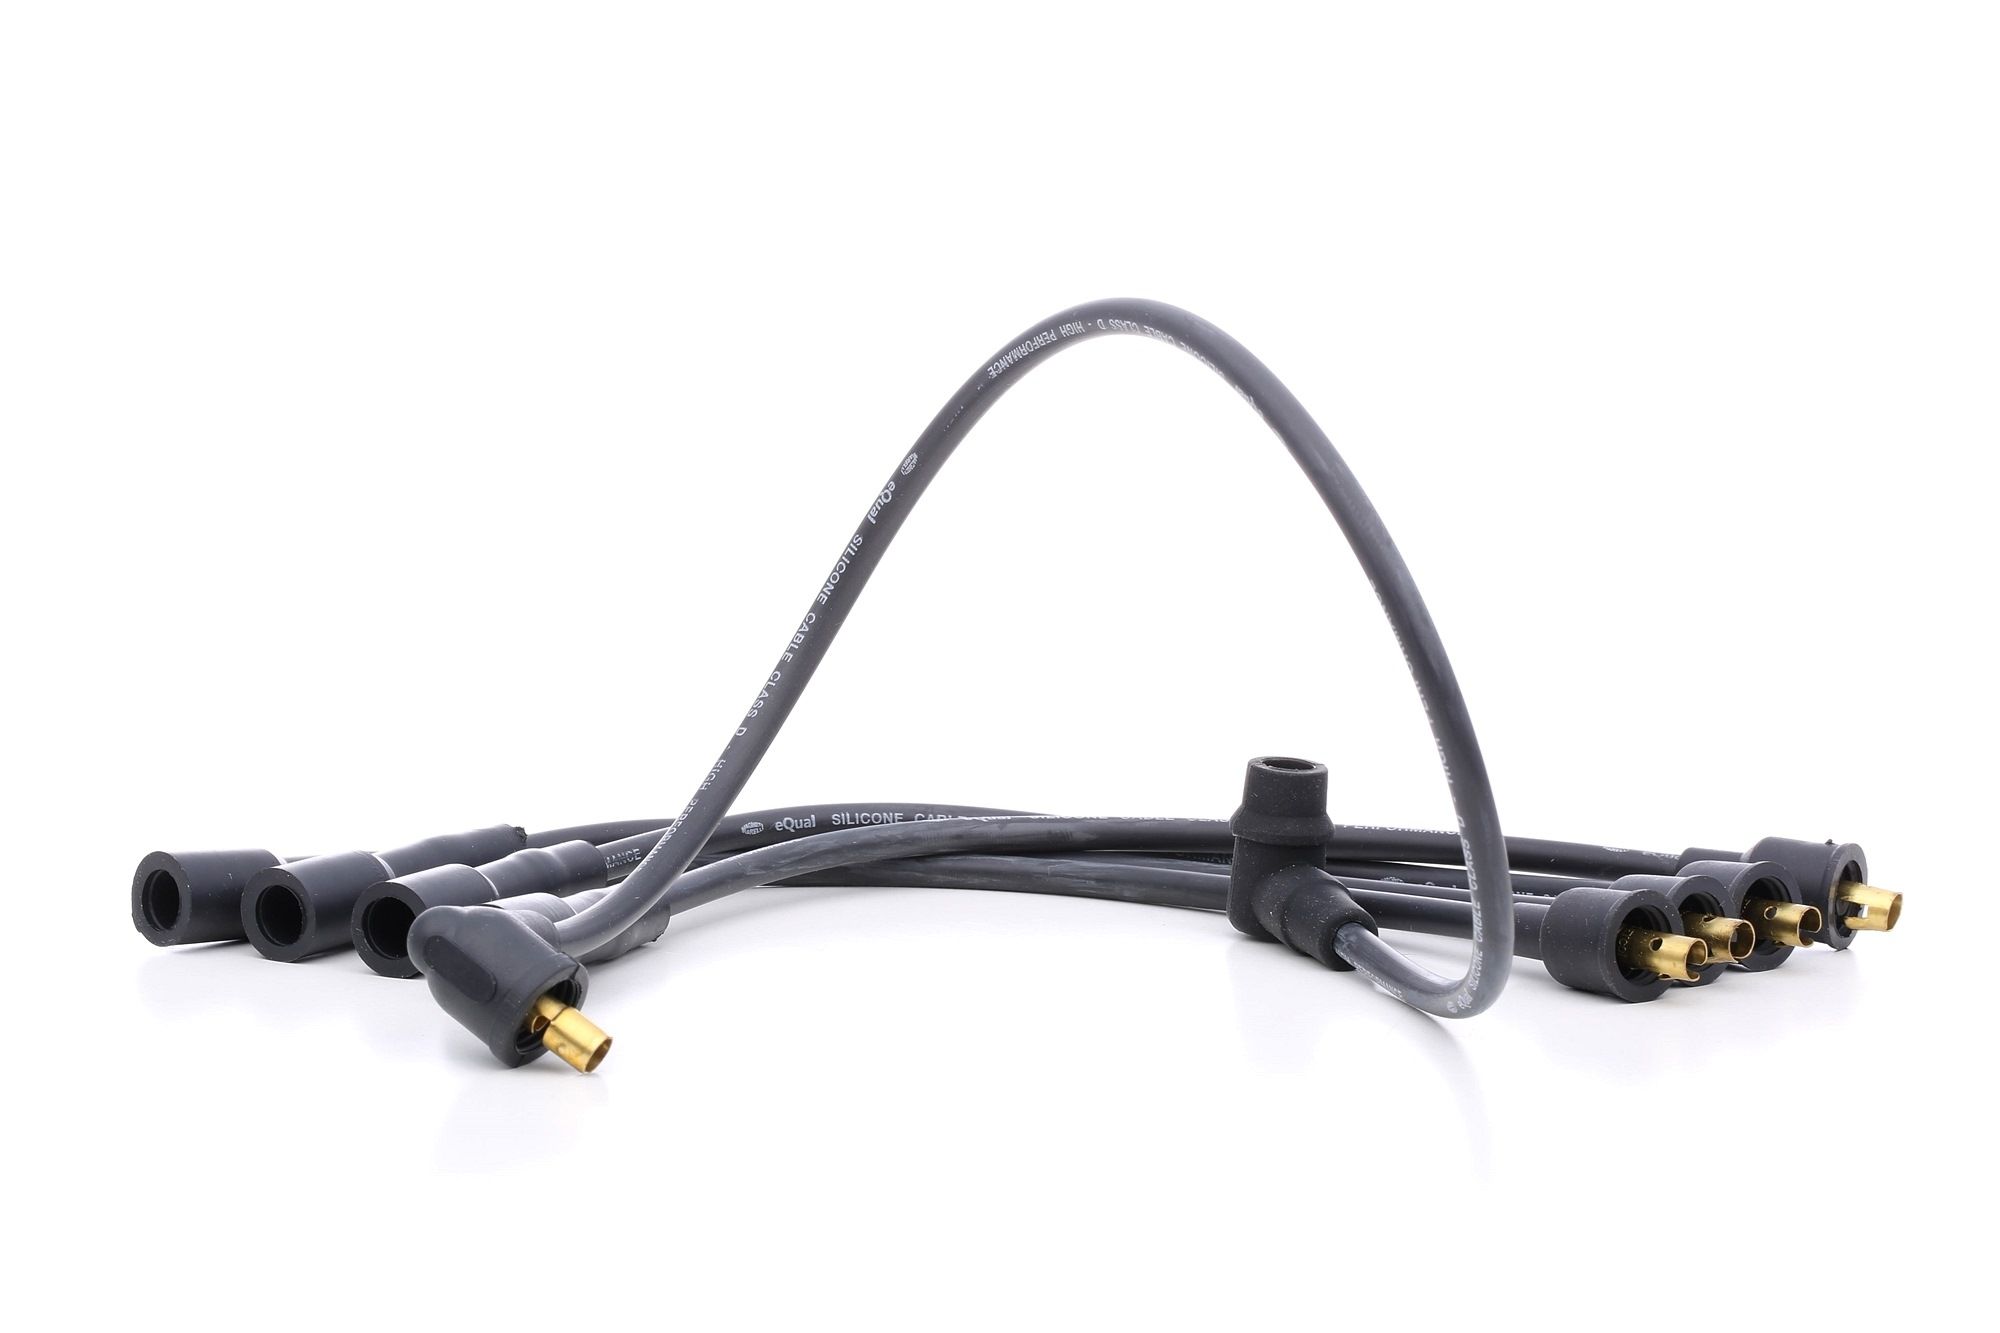 Image of MAGNETI MARELLI Ignition Lead Set RENAULT,VOLVO 941319170067 MSQ0067 Ignition Cable Set,Ignition Wire Set,Ignition Cable Kit,Ignition Lead Kit